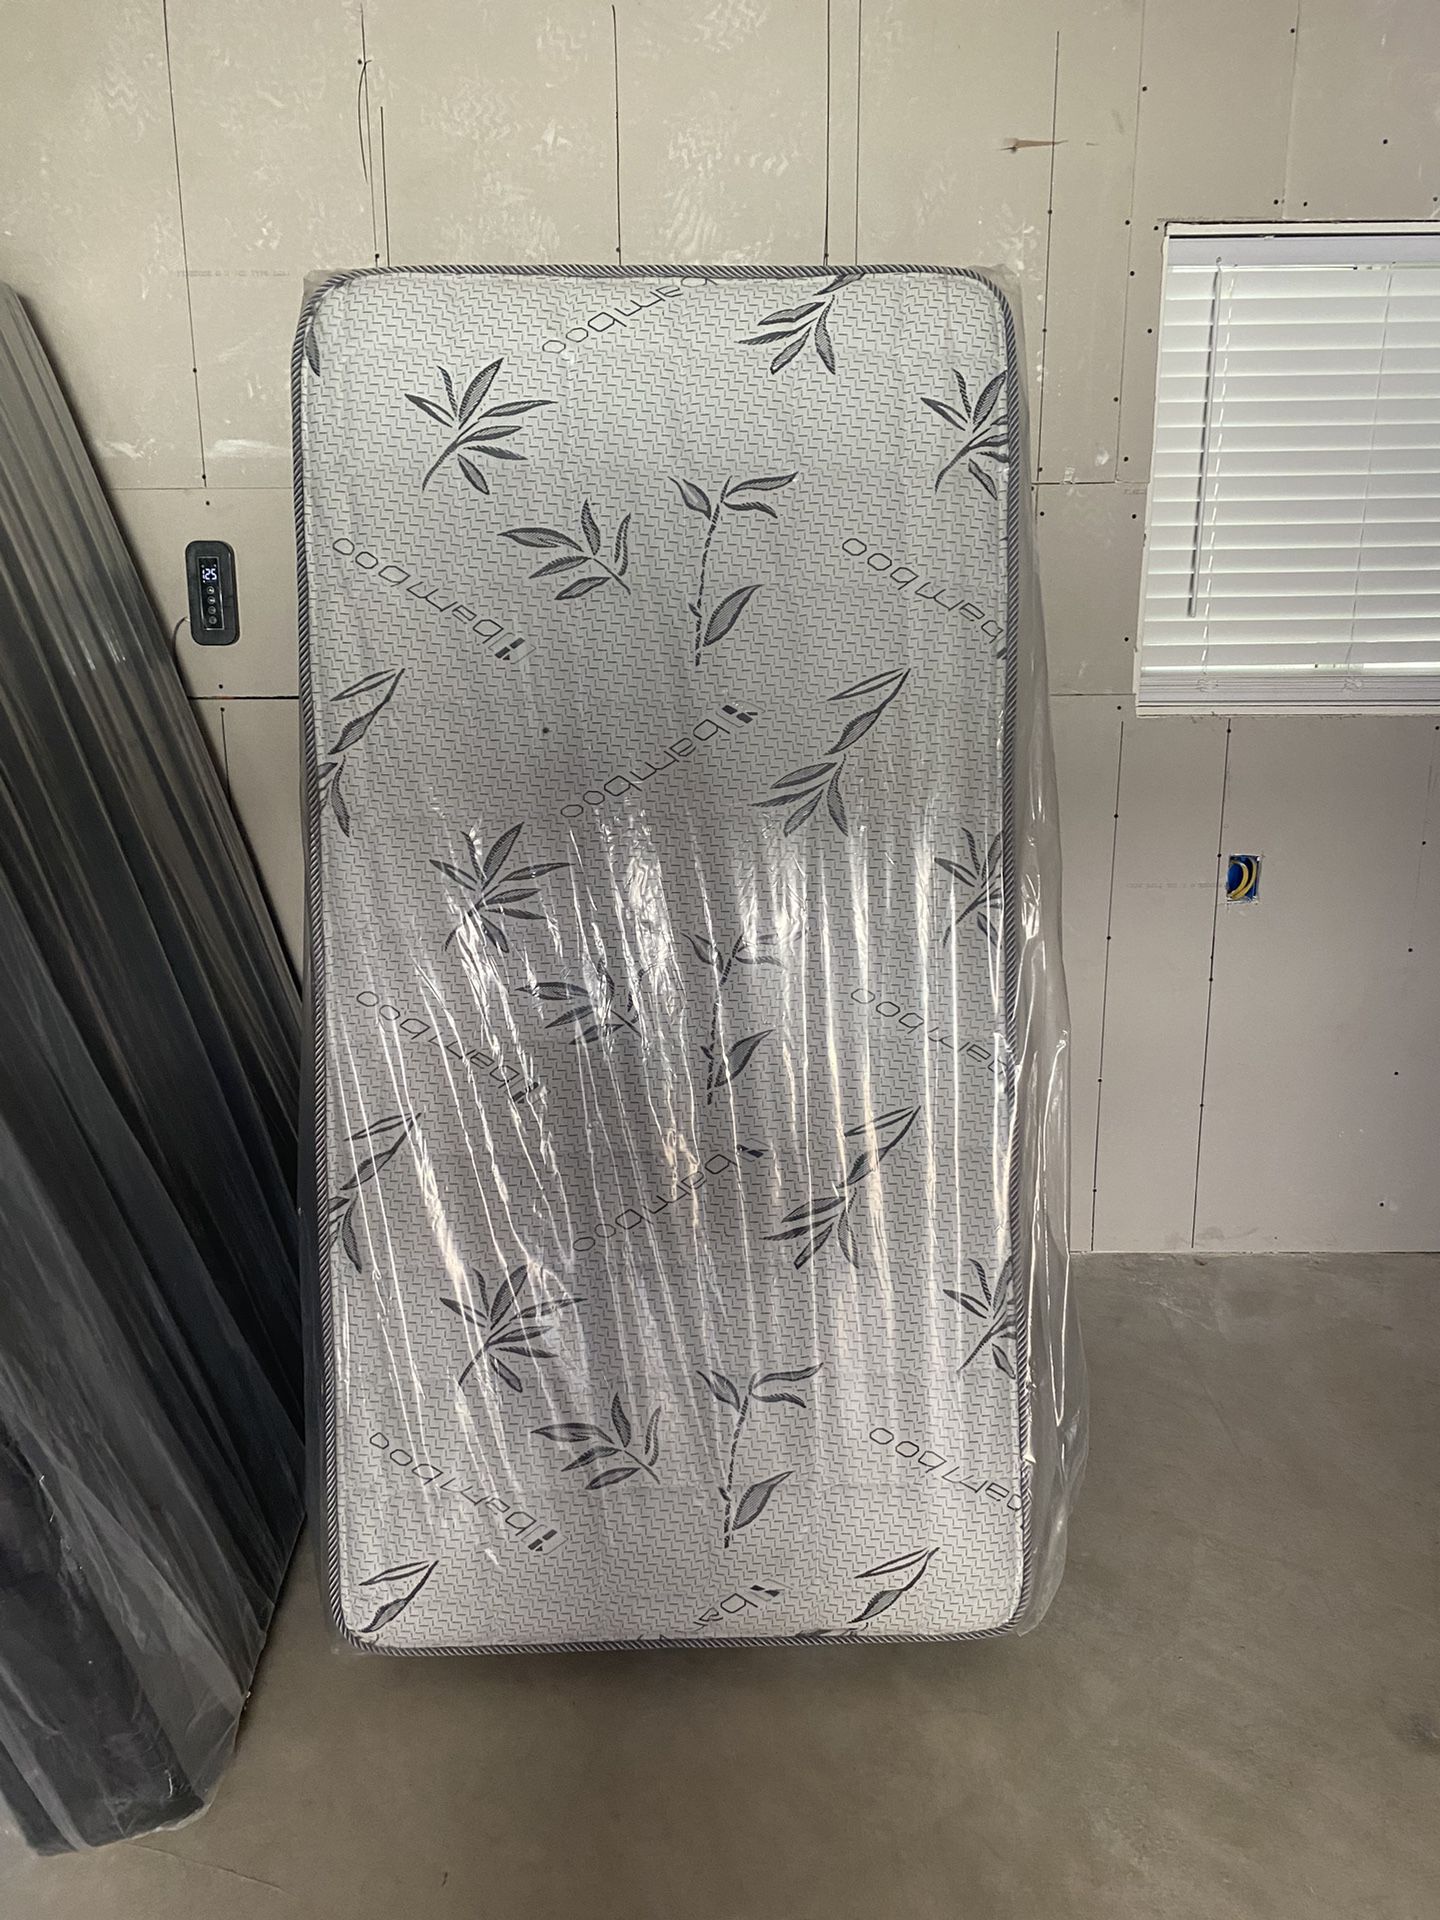 Twin Size Mattress And Box Spring 